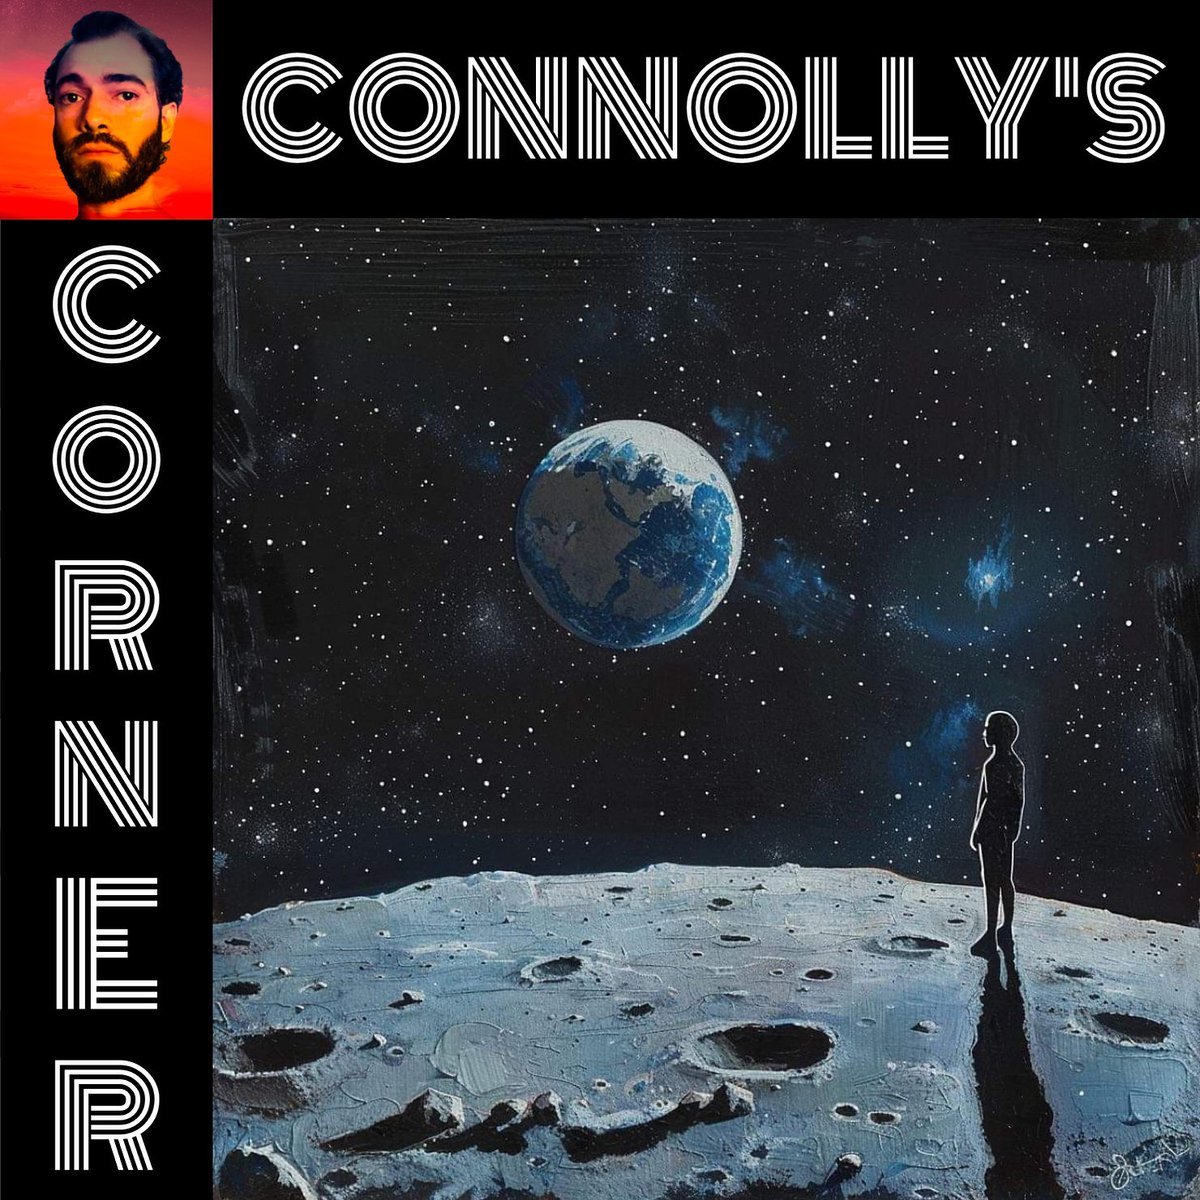 It's Tuesday: for once sitting is a good thing and read @ConnollyTunes featuring The Blimp newartistspotlight.org/post/this-week… @NAS_Spotlight #indiemusic #IwantmyNAS #StopPayola